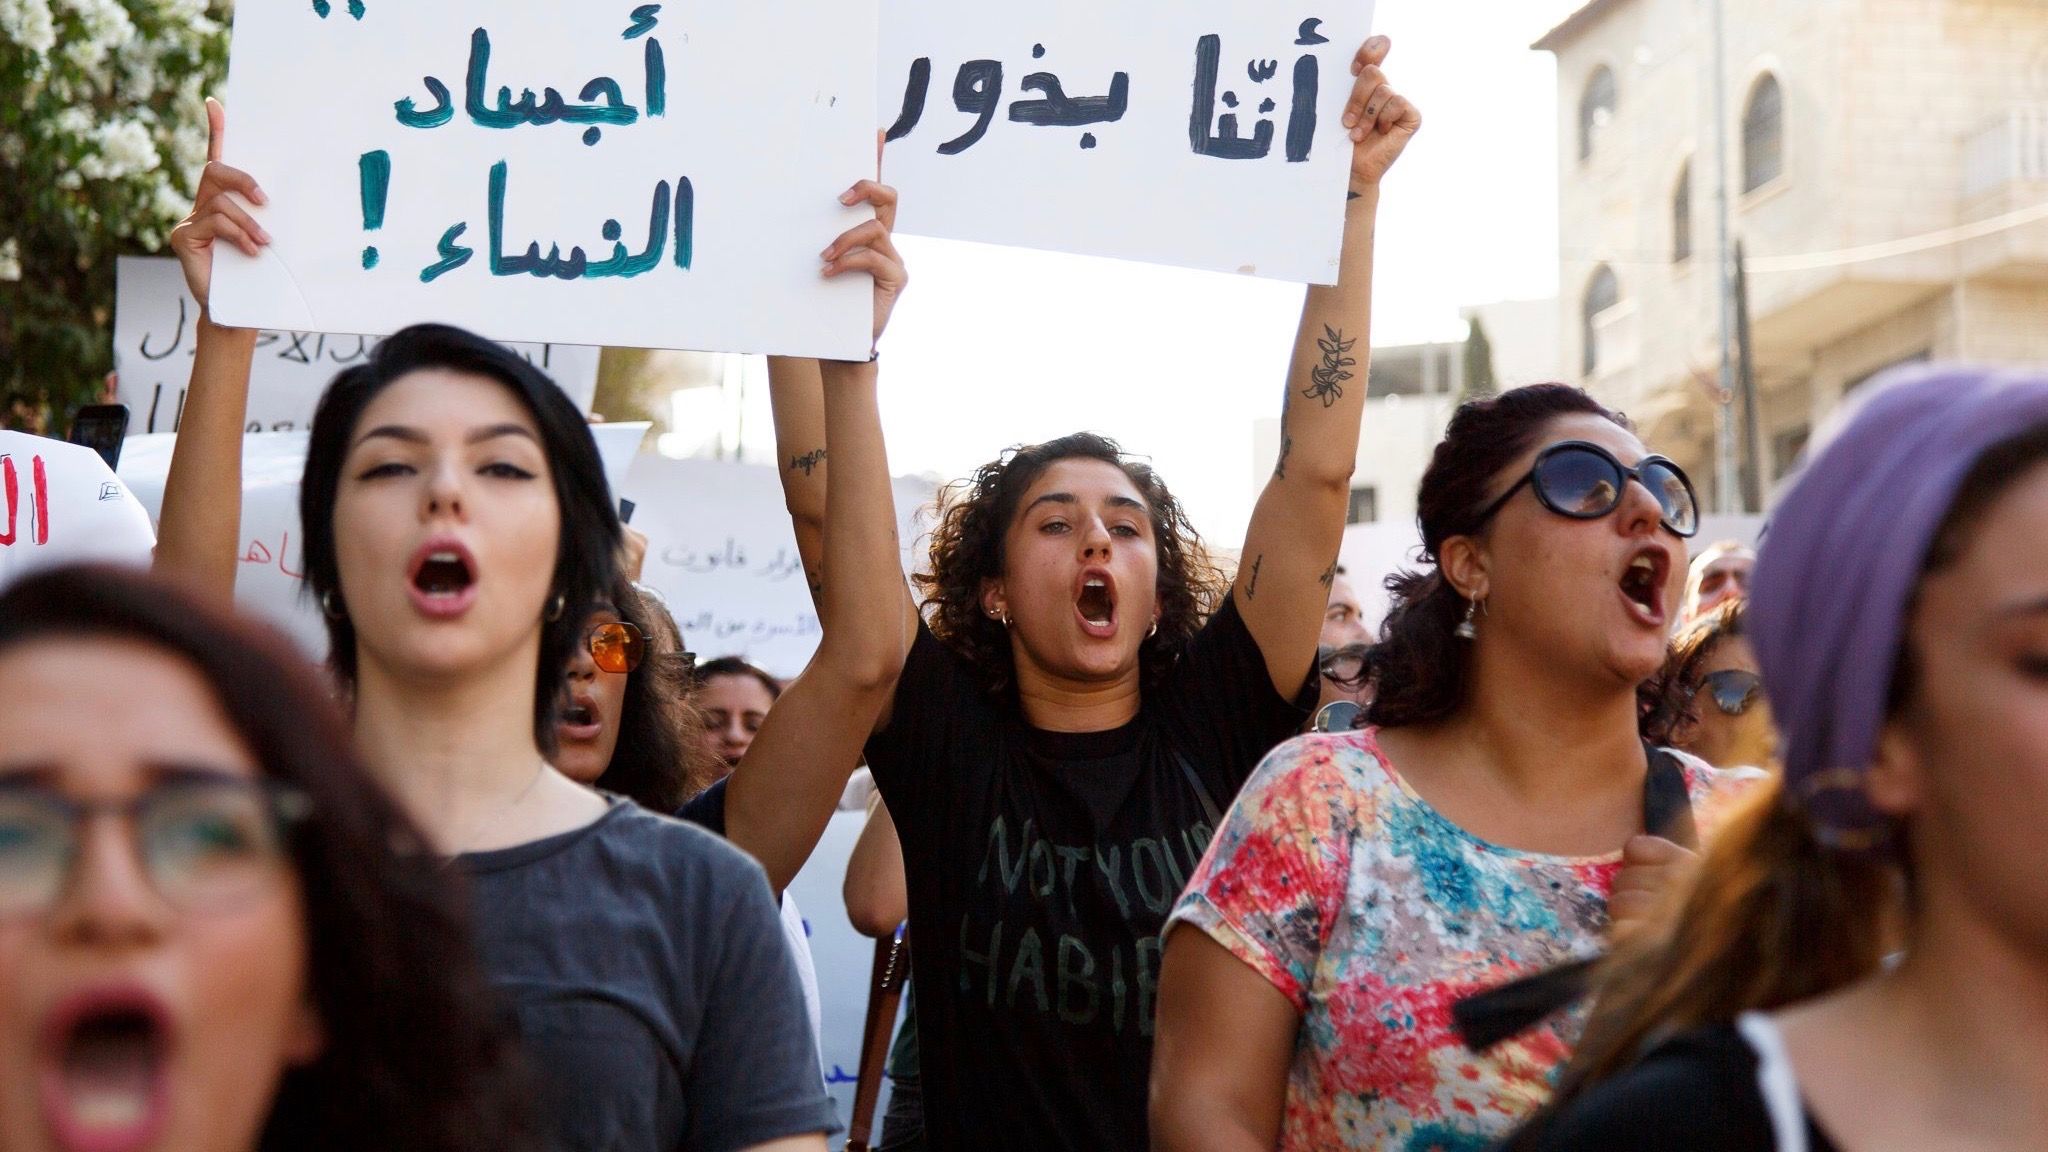 Palestinian Women To March Against Gender Based Violence, Peoples